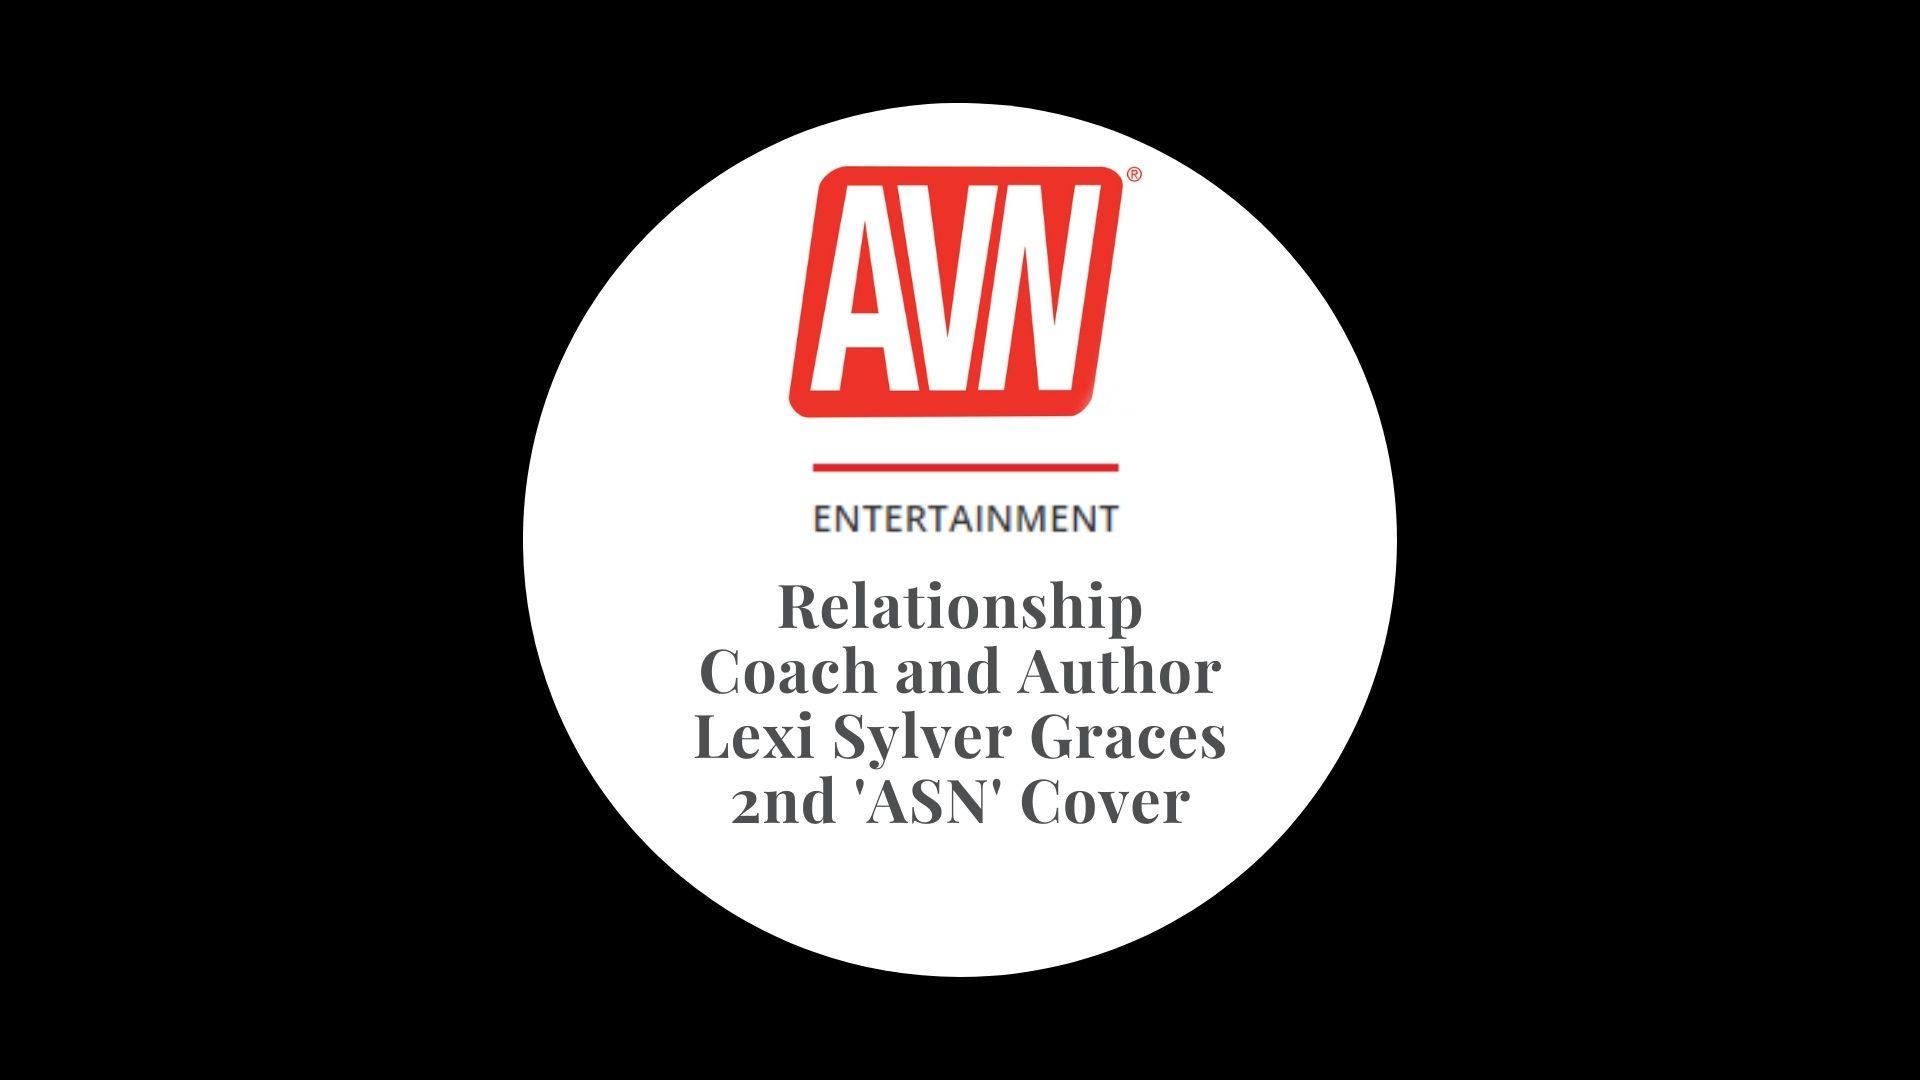 “Relationship Coach and Author Lexi Sylver Graces 2nd ‘ASN’ Cover” — AVN Article